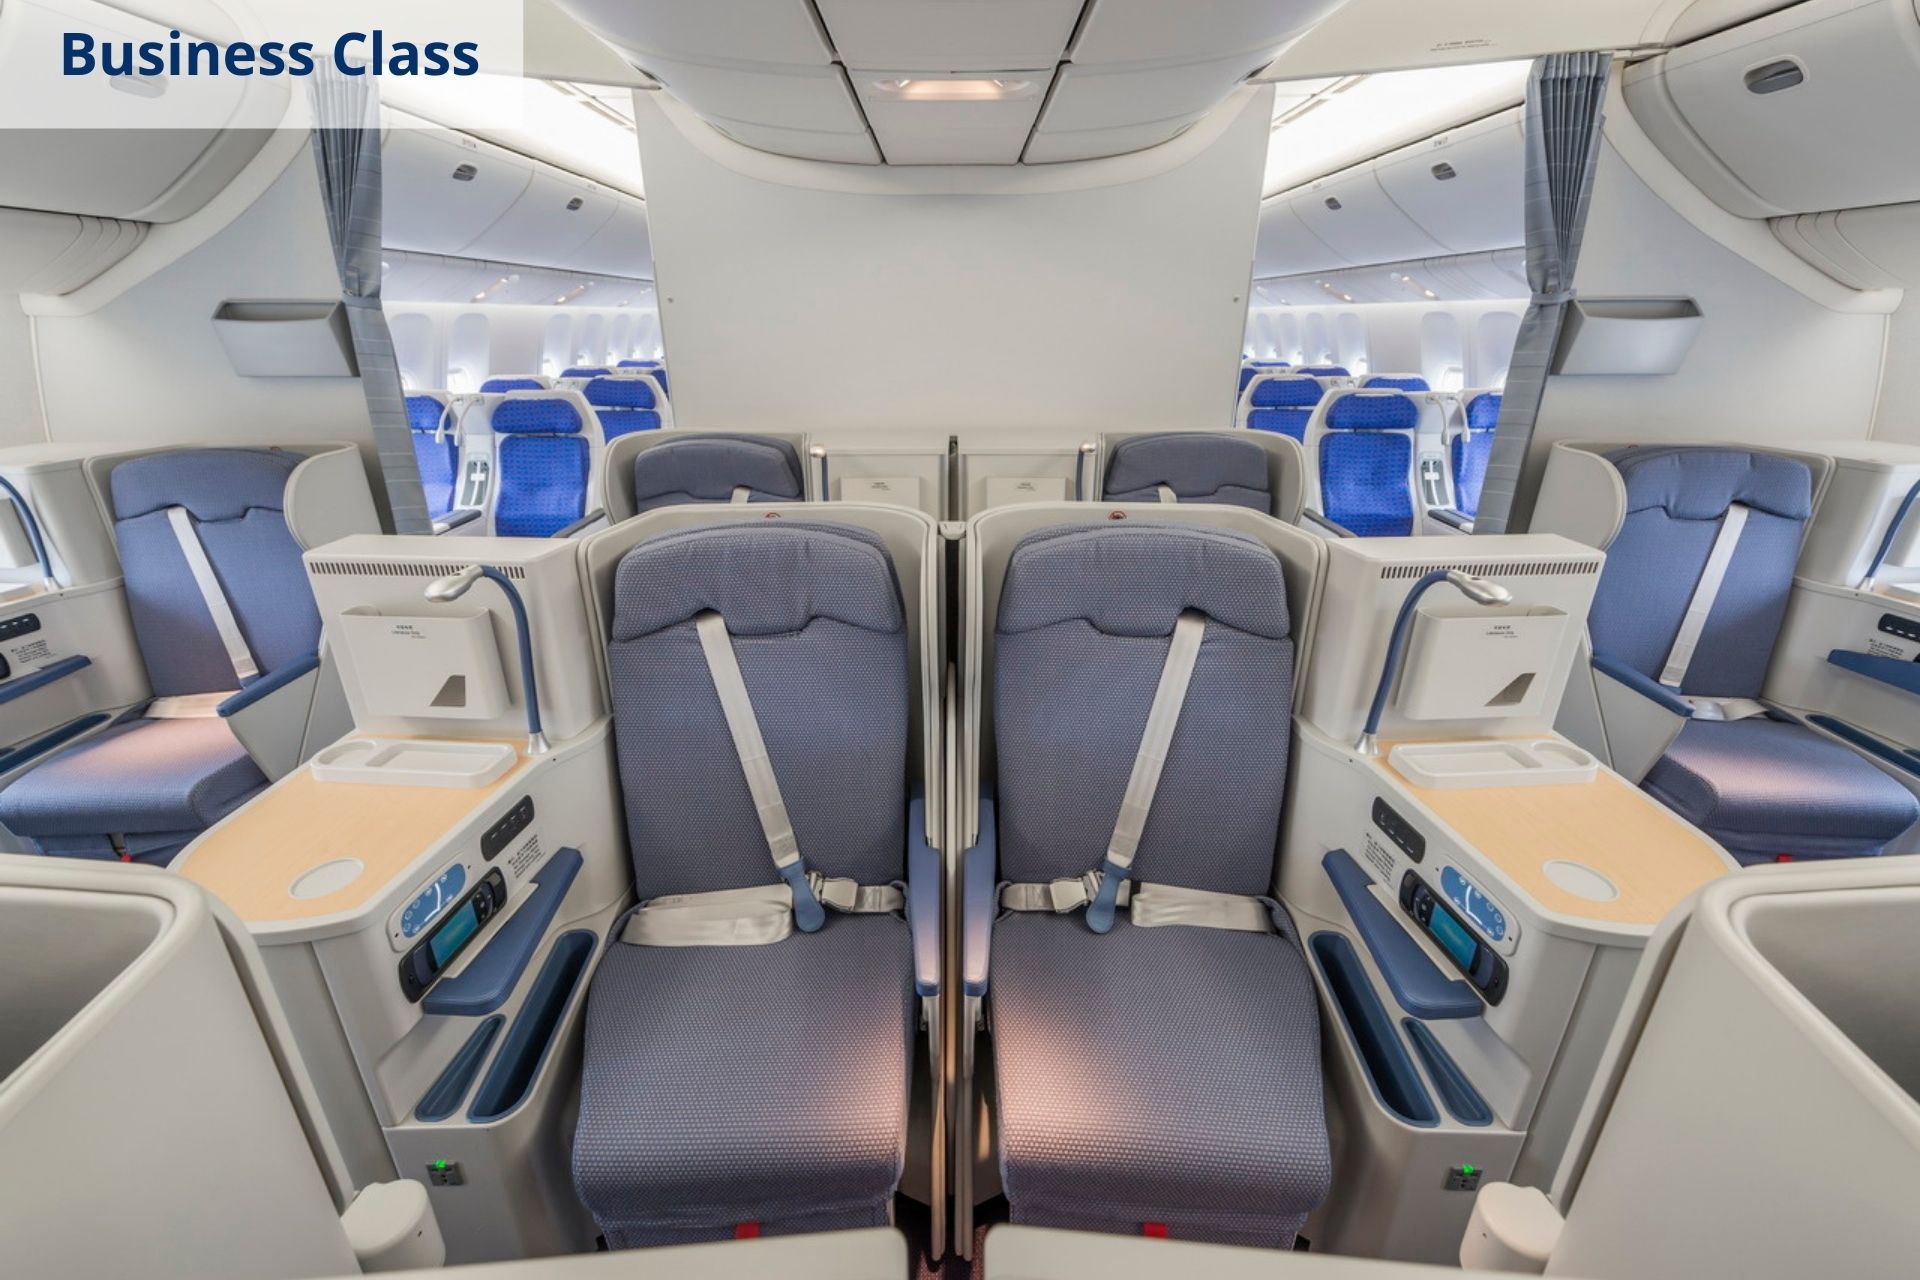 China Southern Airlines business class